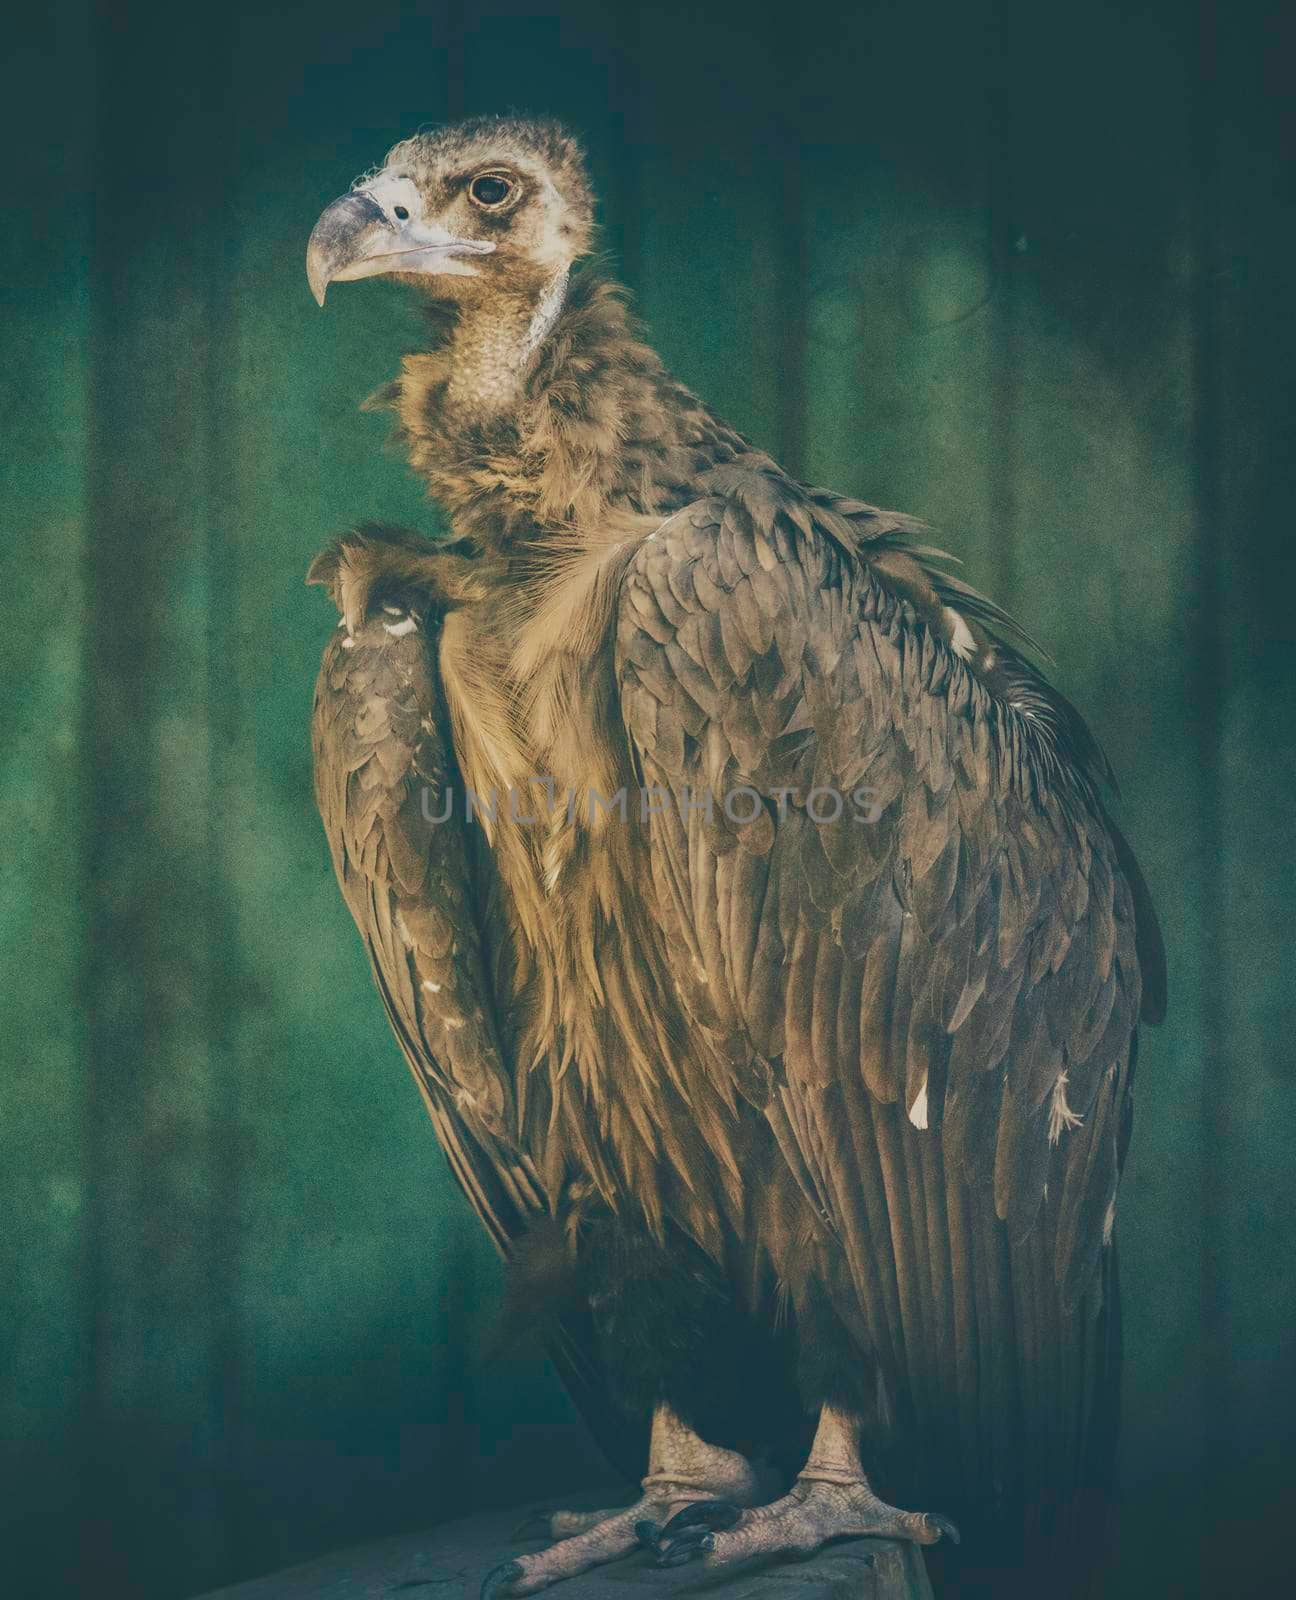 portrait of a large eagle standing on a log